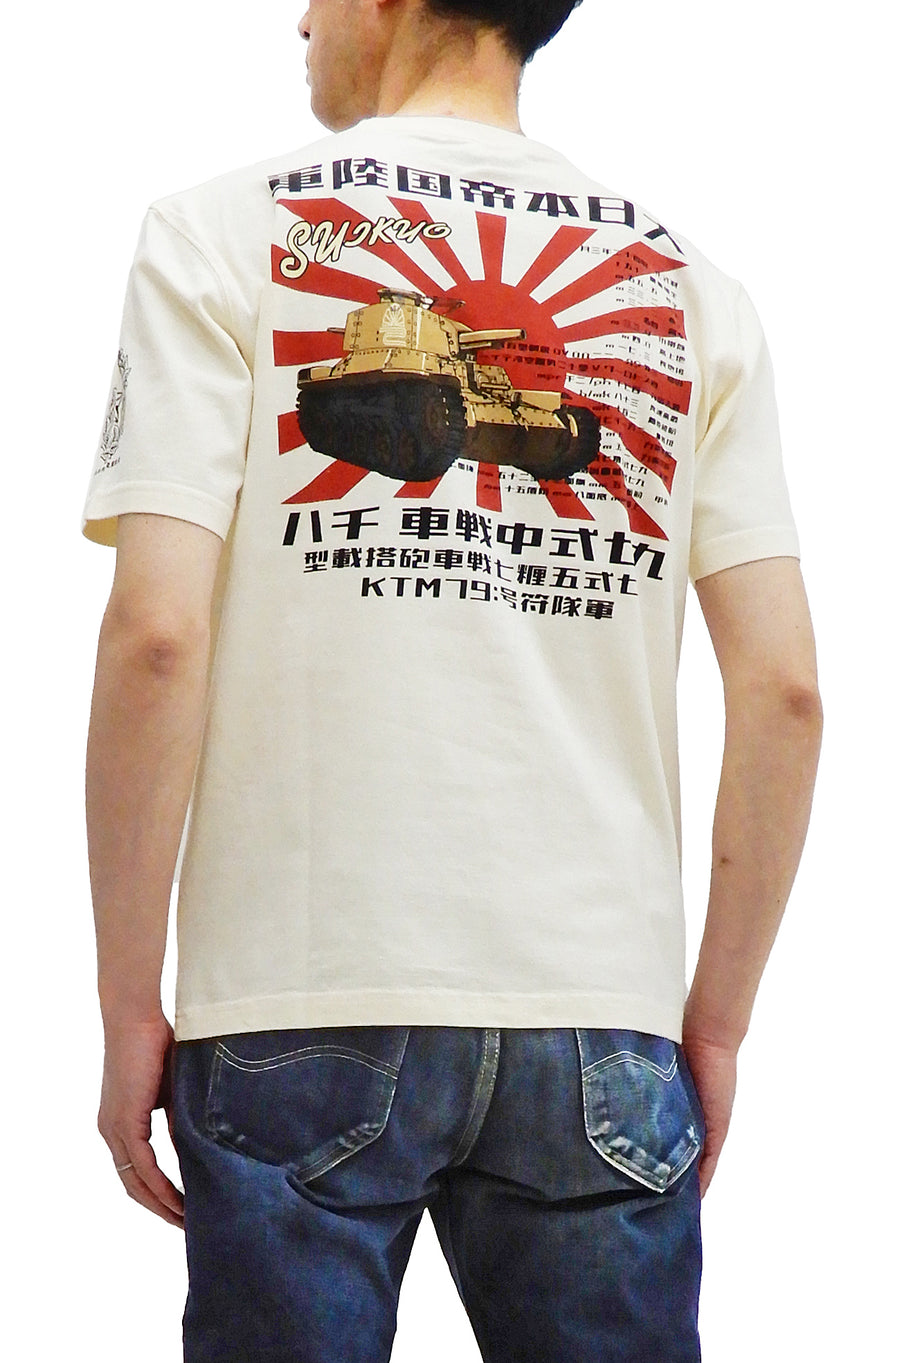 Suikyo T-Shirt Men's Japanese Military Tank Graphic Short Sleeve Tee SYT-191 Off-White